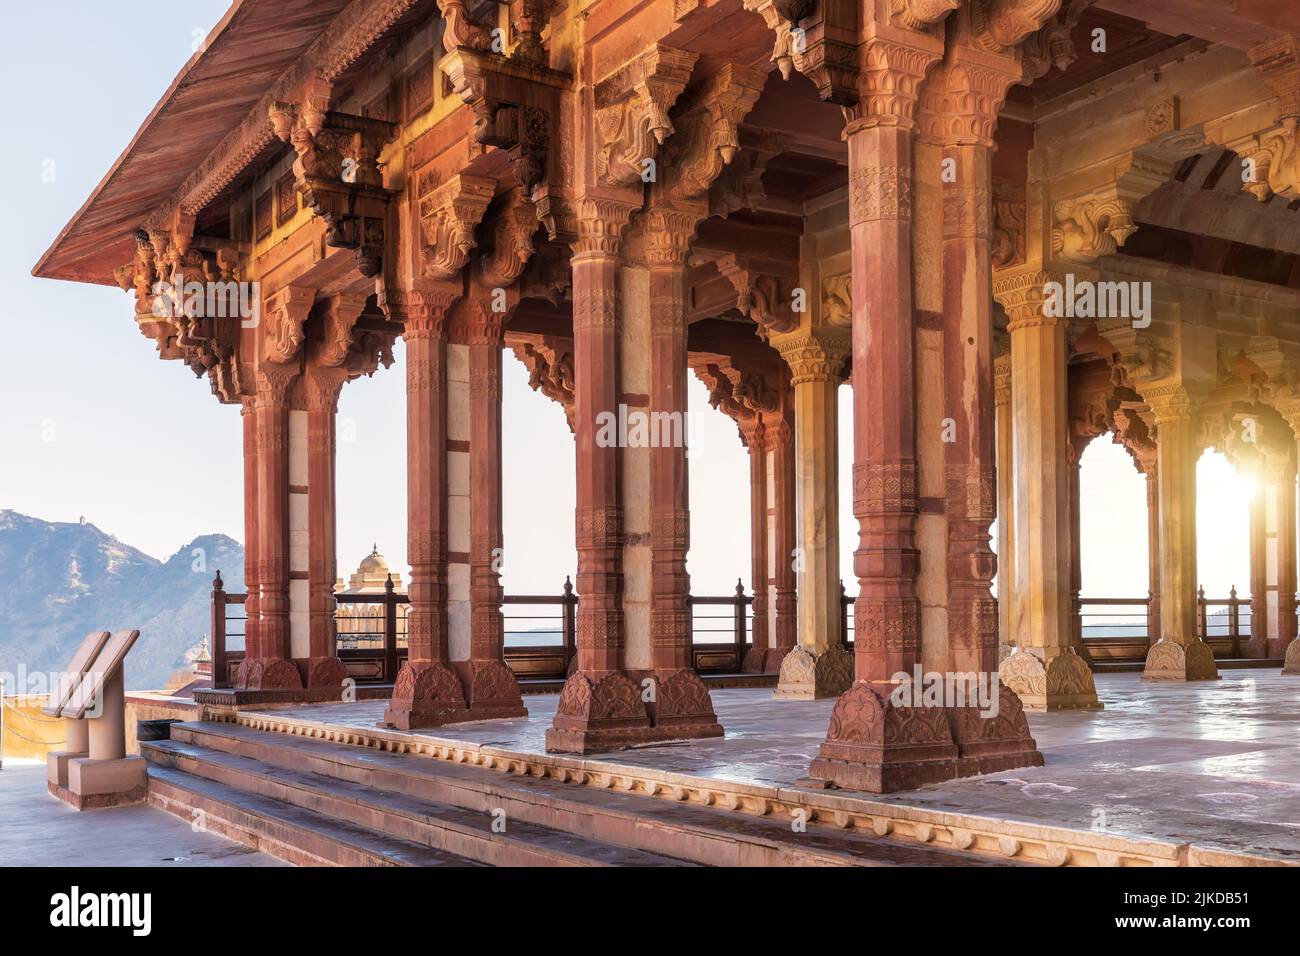 Ganesh Pol Hall in Amber Fort Jaipur, India. Stock Photo